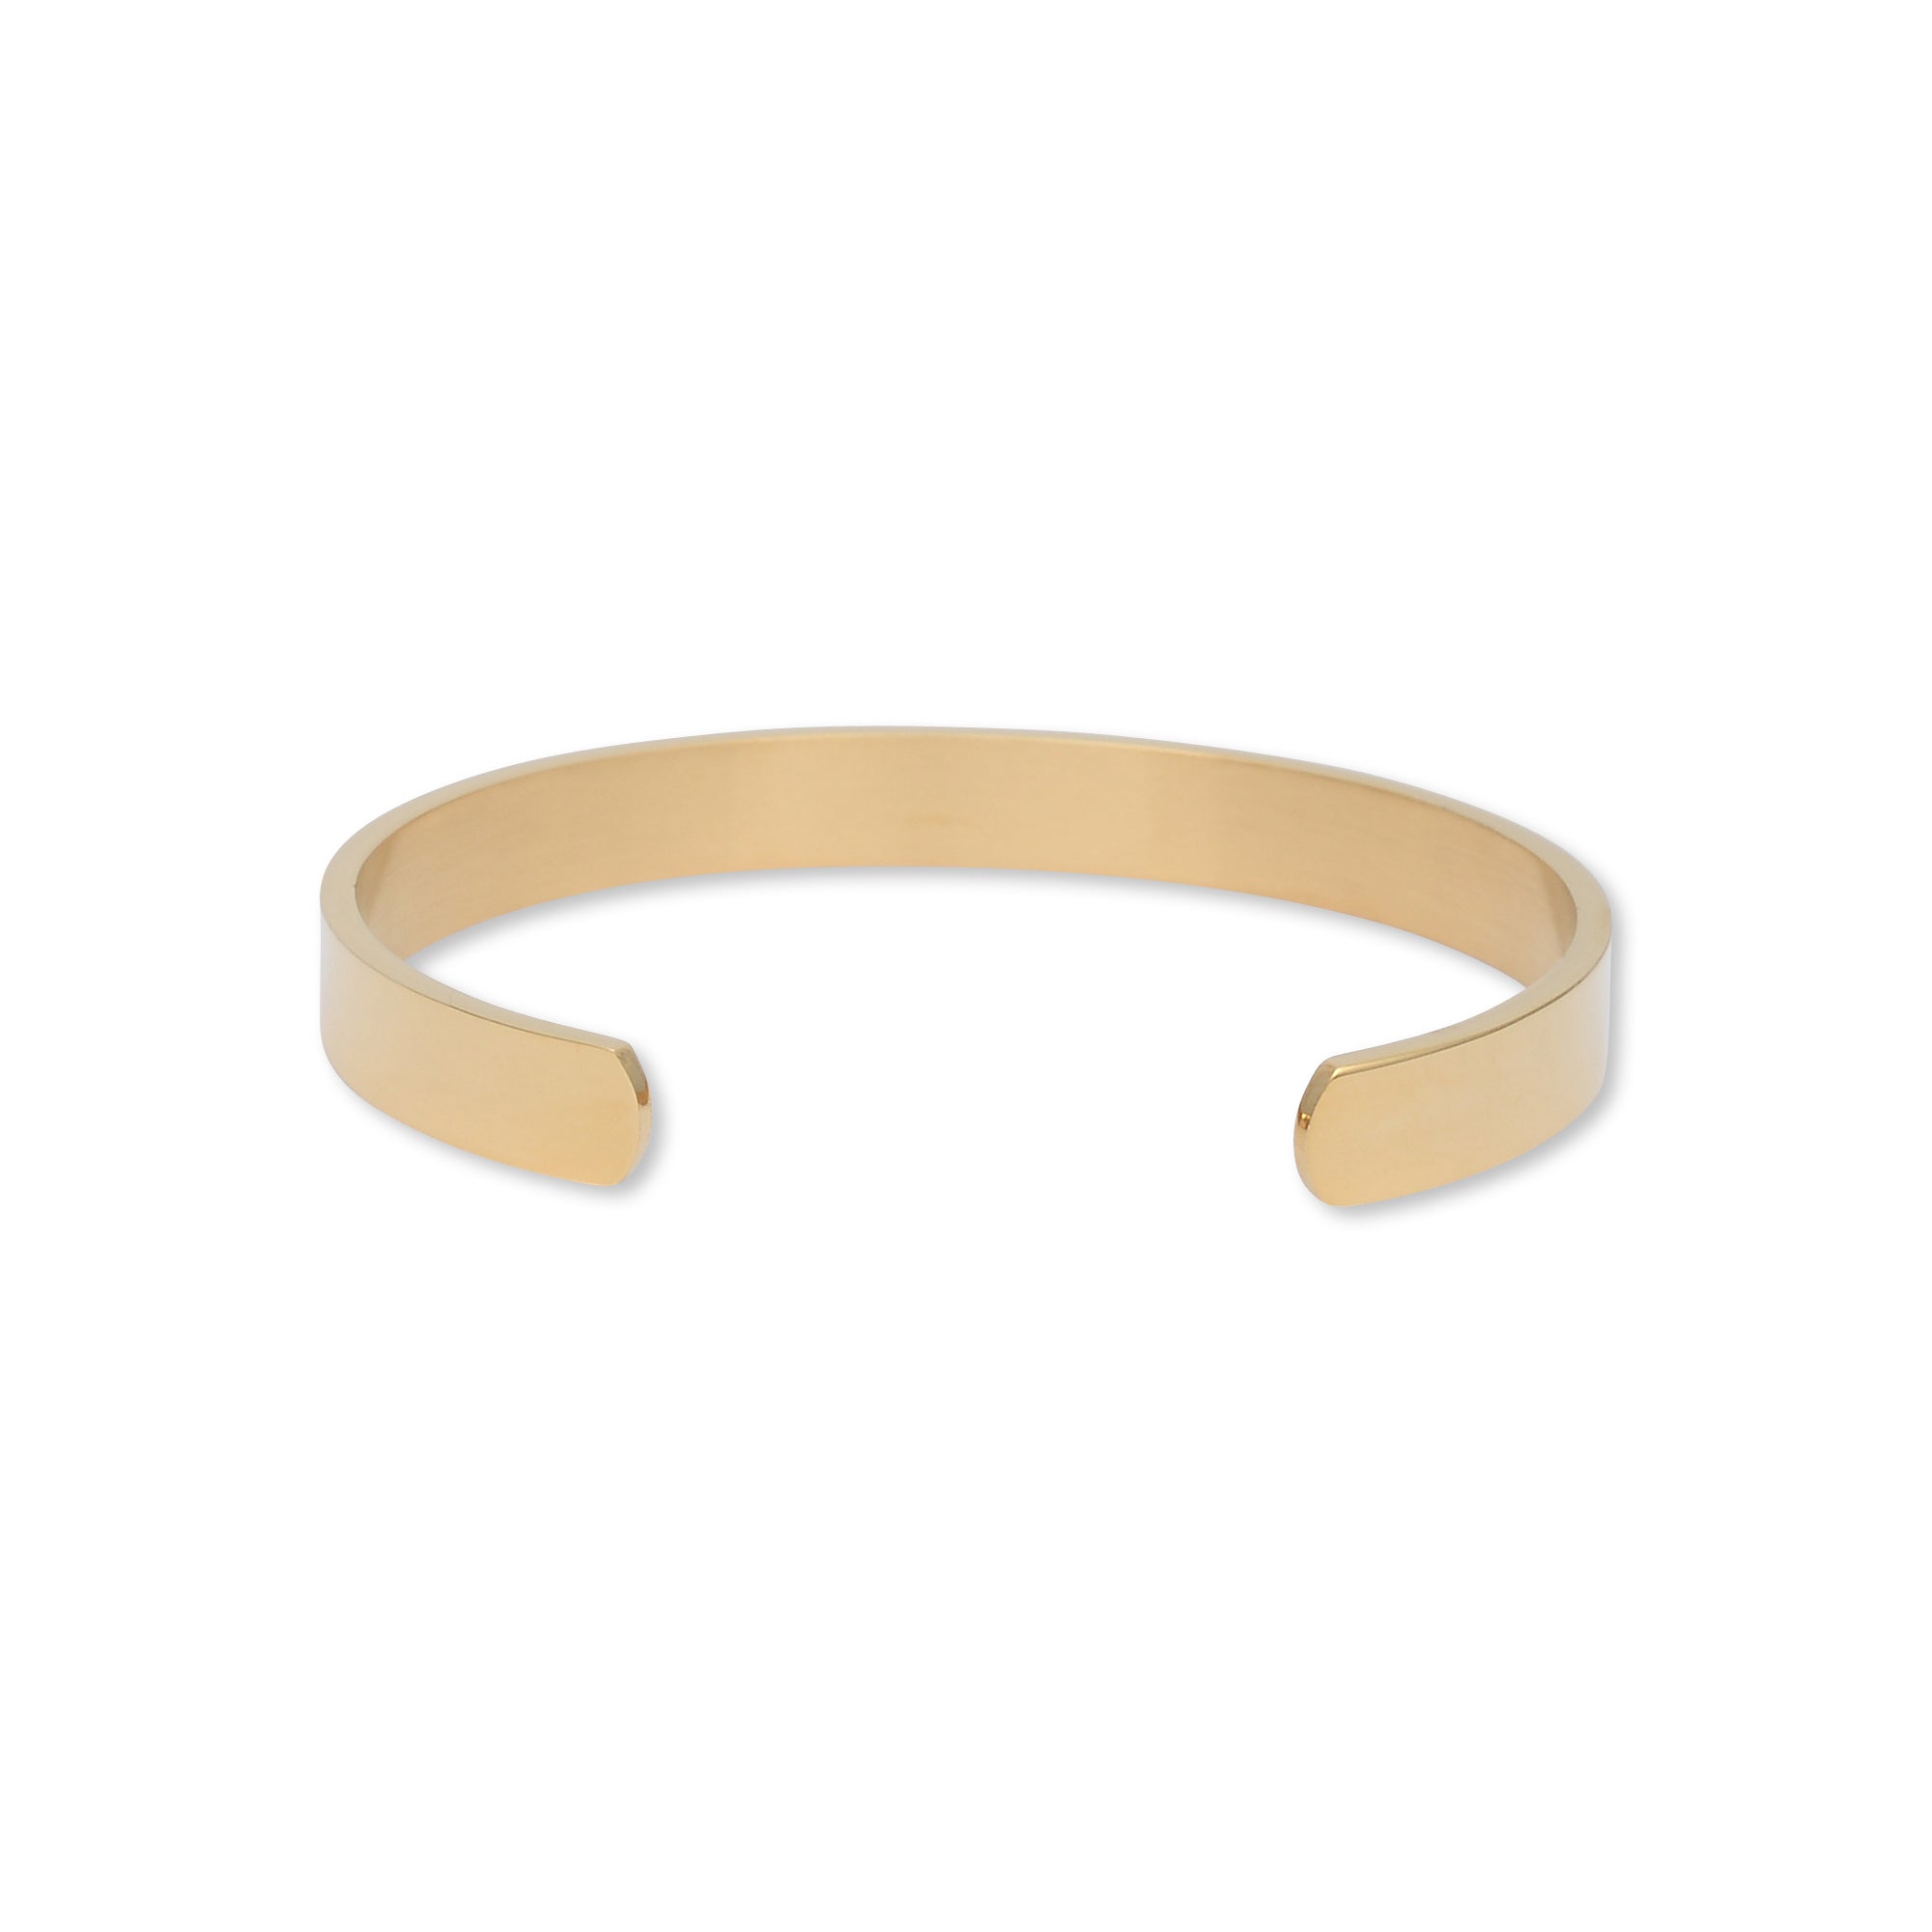 Gold Stainless Steel Cuff Bangle